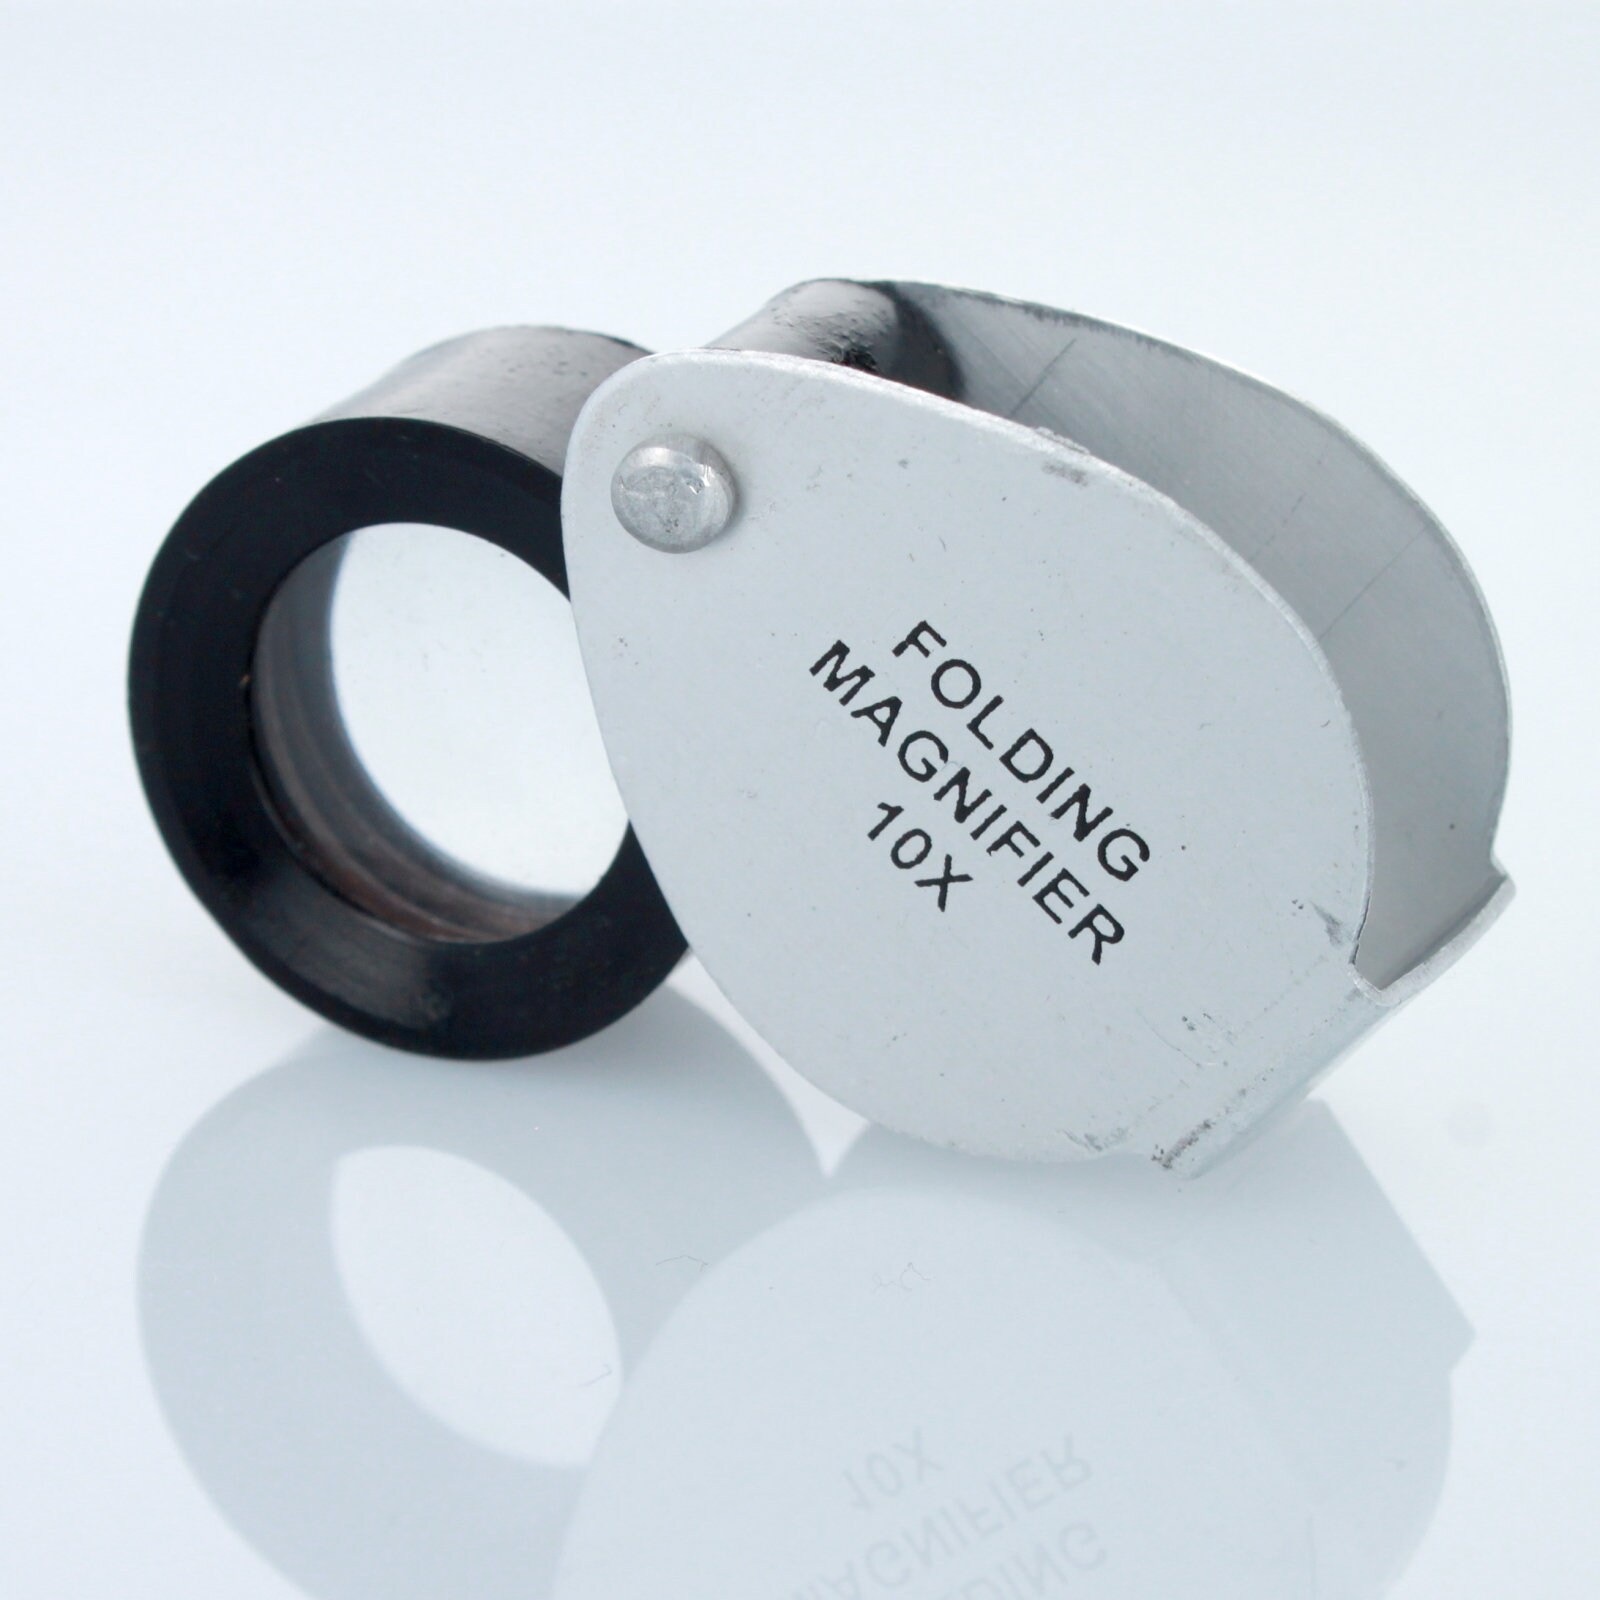 10x Jewelers Loupe Folding Magnifier Tool 18mm Lens